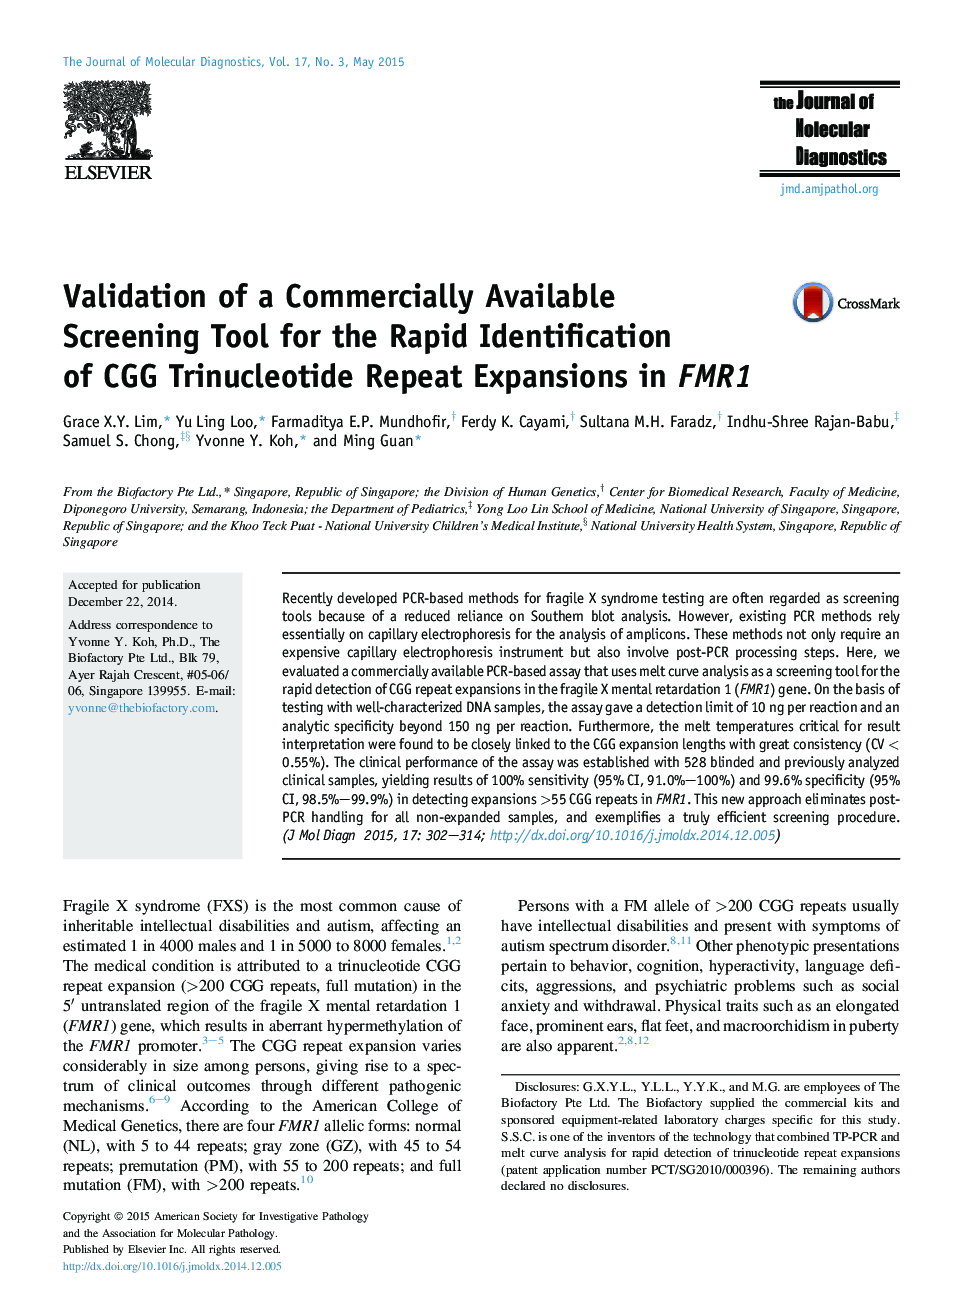 Regular articleValidation of a Commercially Available Screening Tool for the Rapid Identification of CGG Trinucleotide Repeat Expansions in FMR1